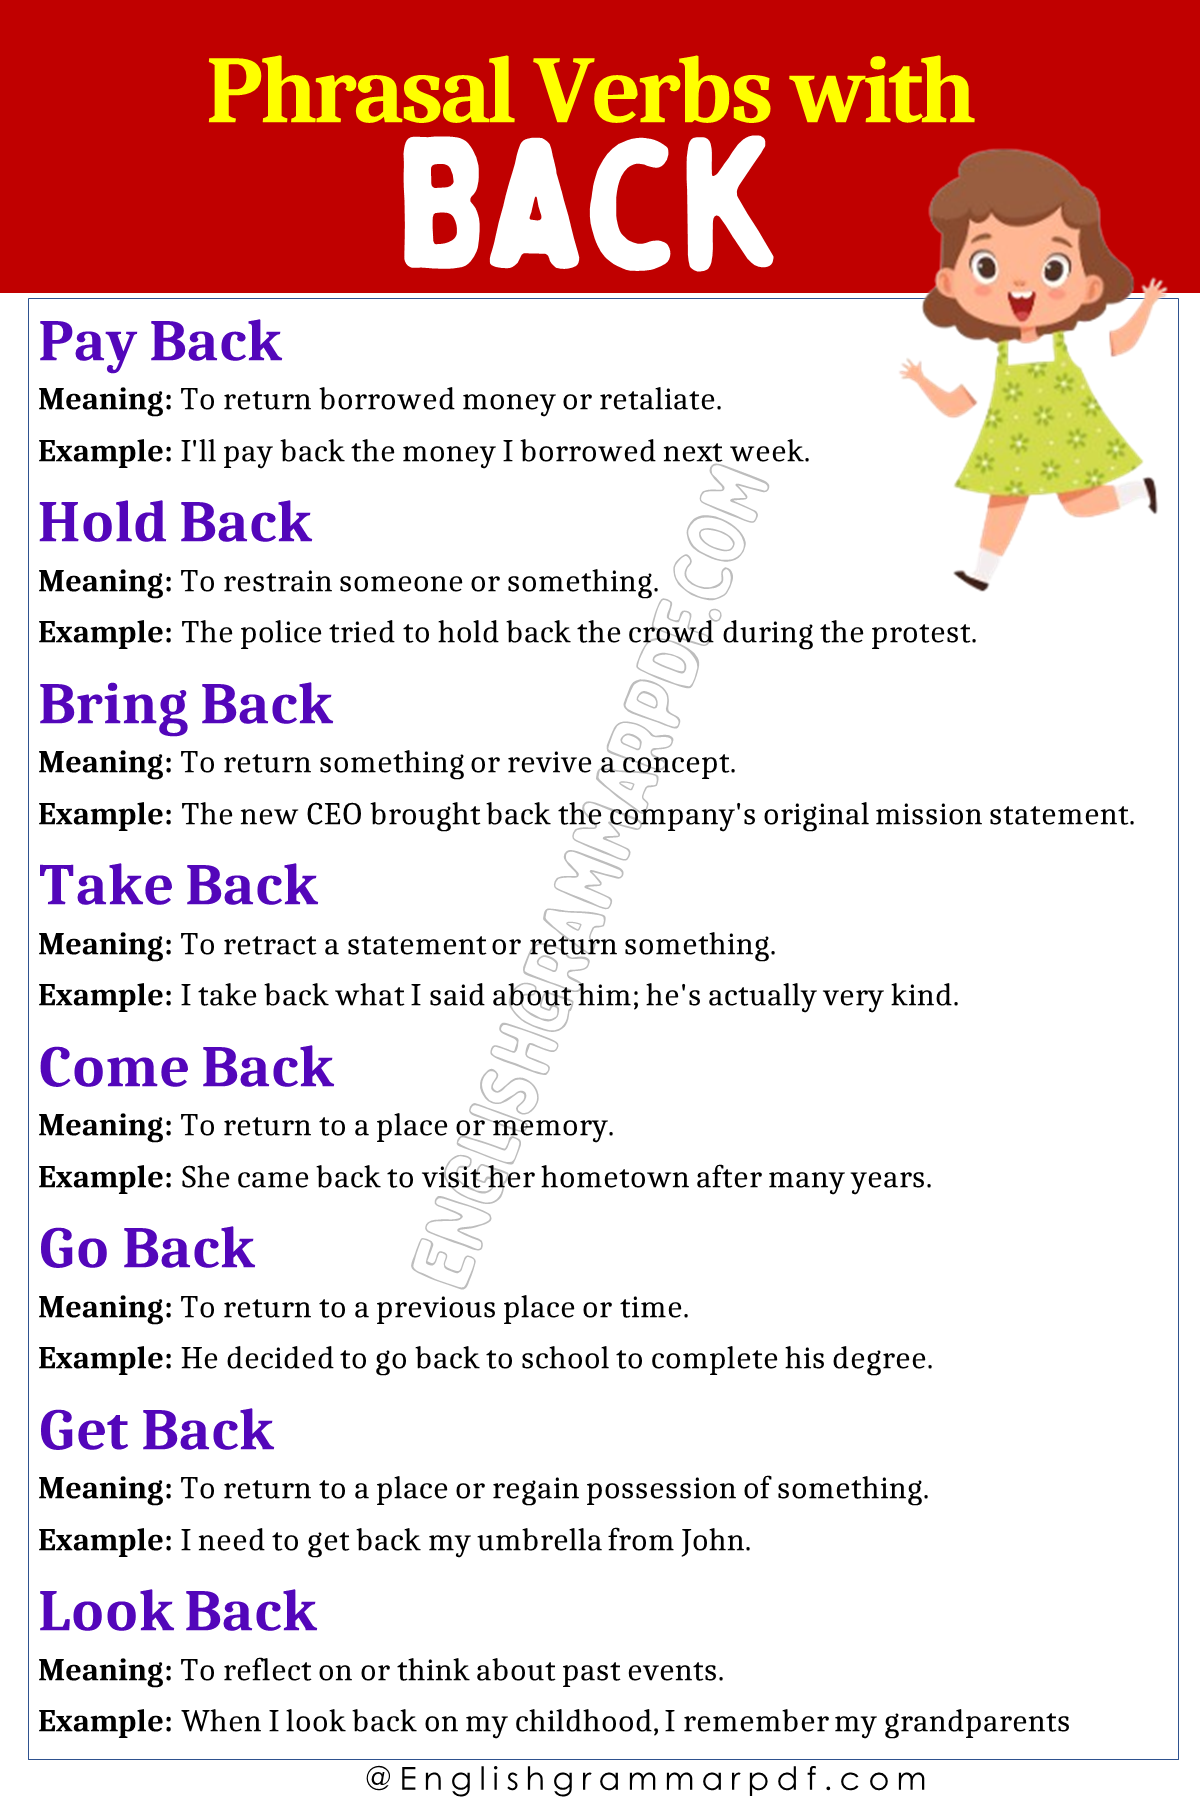 Phrasal Verbs with Back